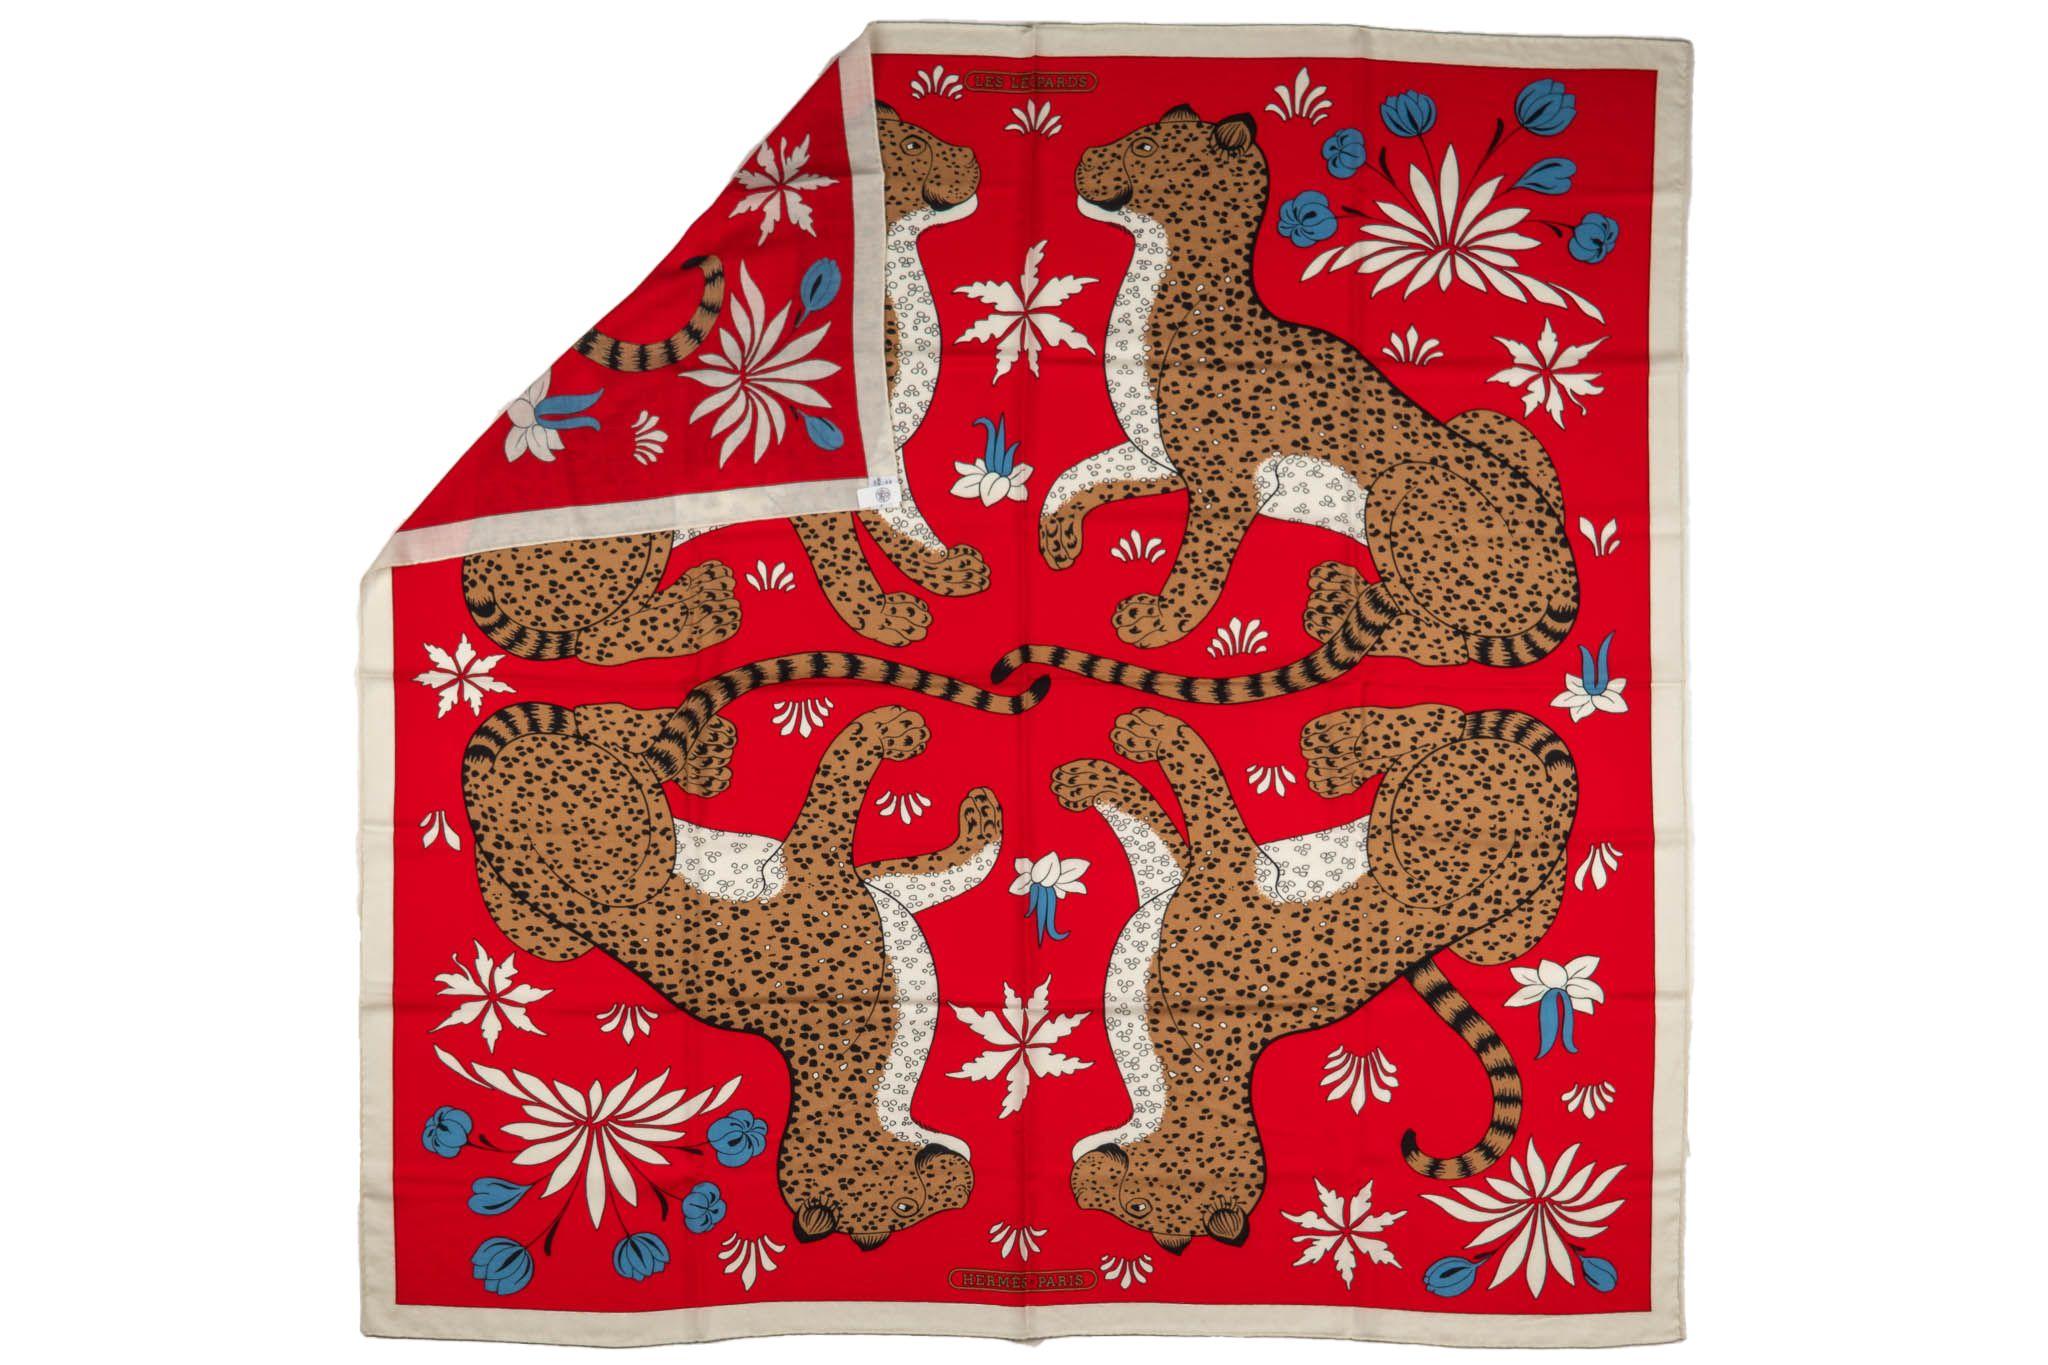 New with original box highly collectible cashmere and silk shawl. Les leopards design in red and brown color way.